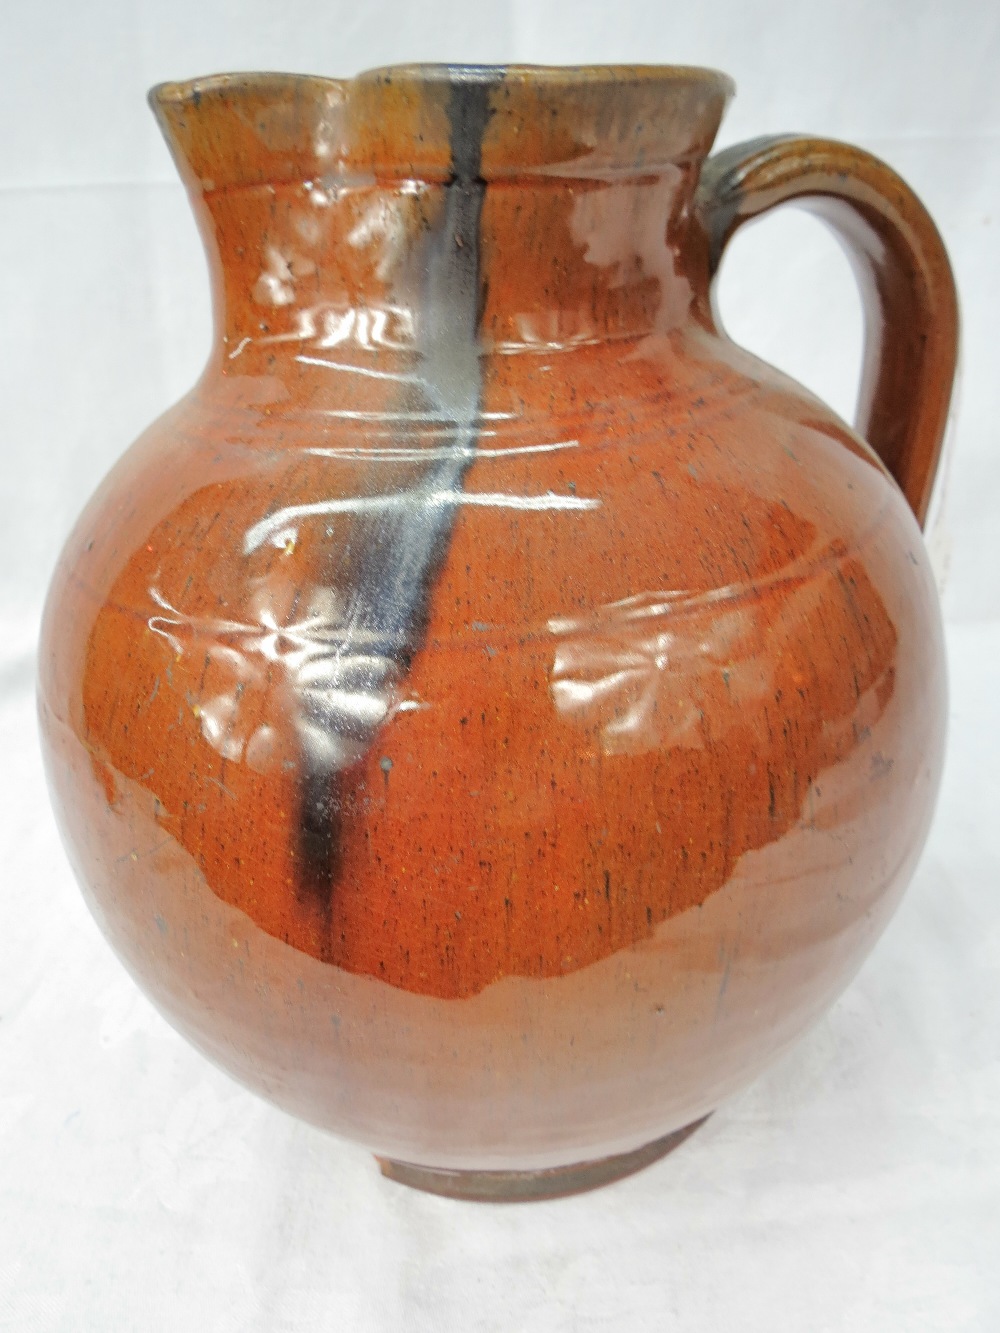 A large hand-thrown jug in terracotta with clear glaze, 10.5" high.